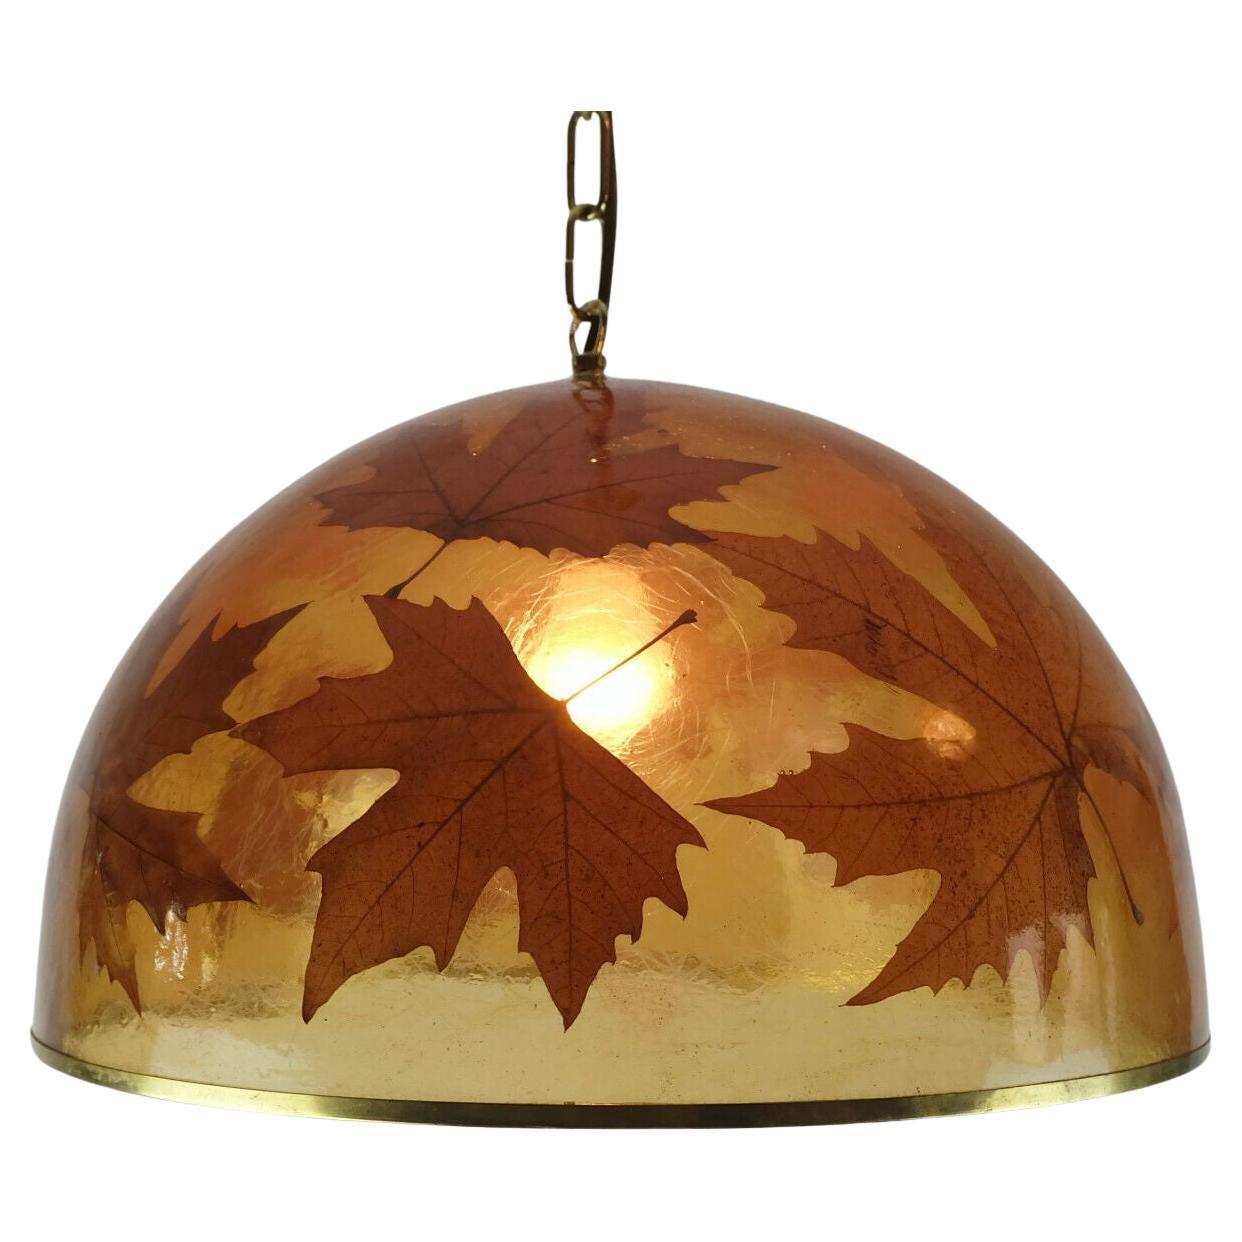 rare and outstanding vintage PENDANT LAMP resin with maple leaves 1970s hanging 